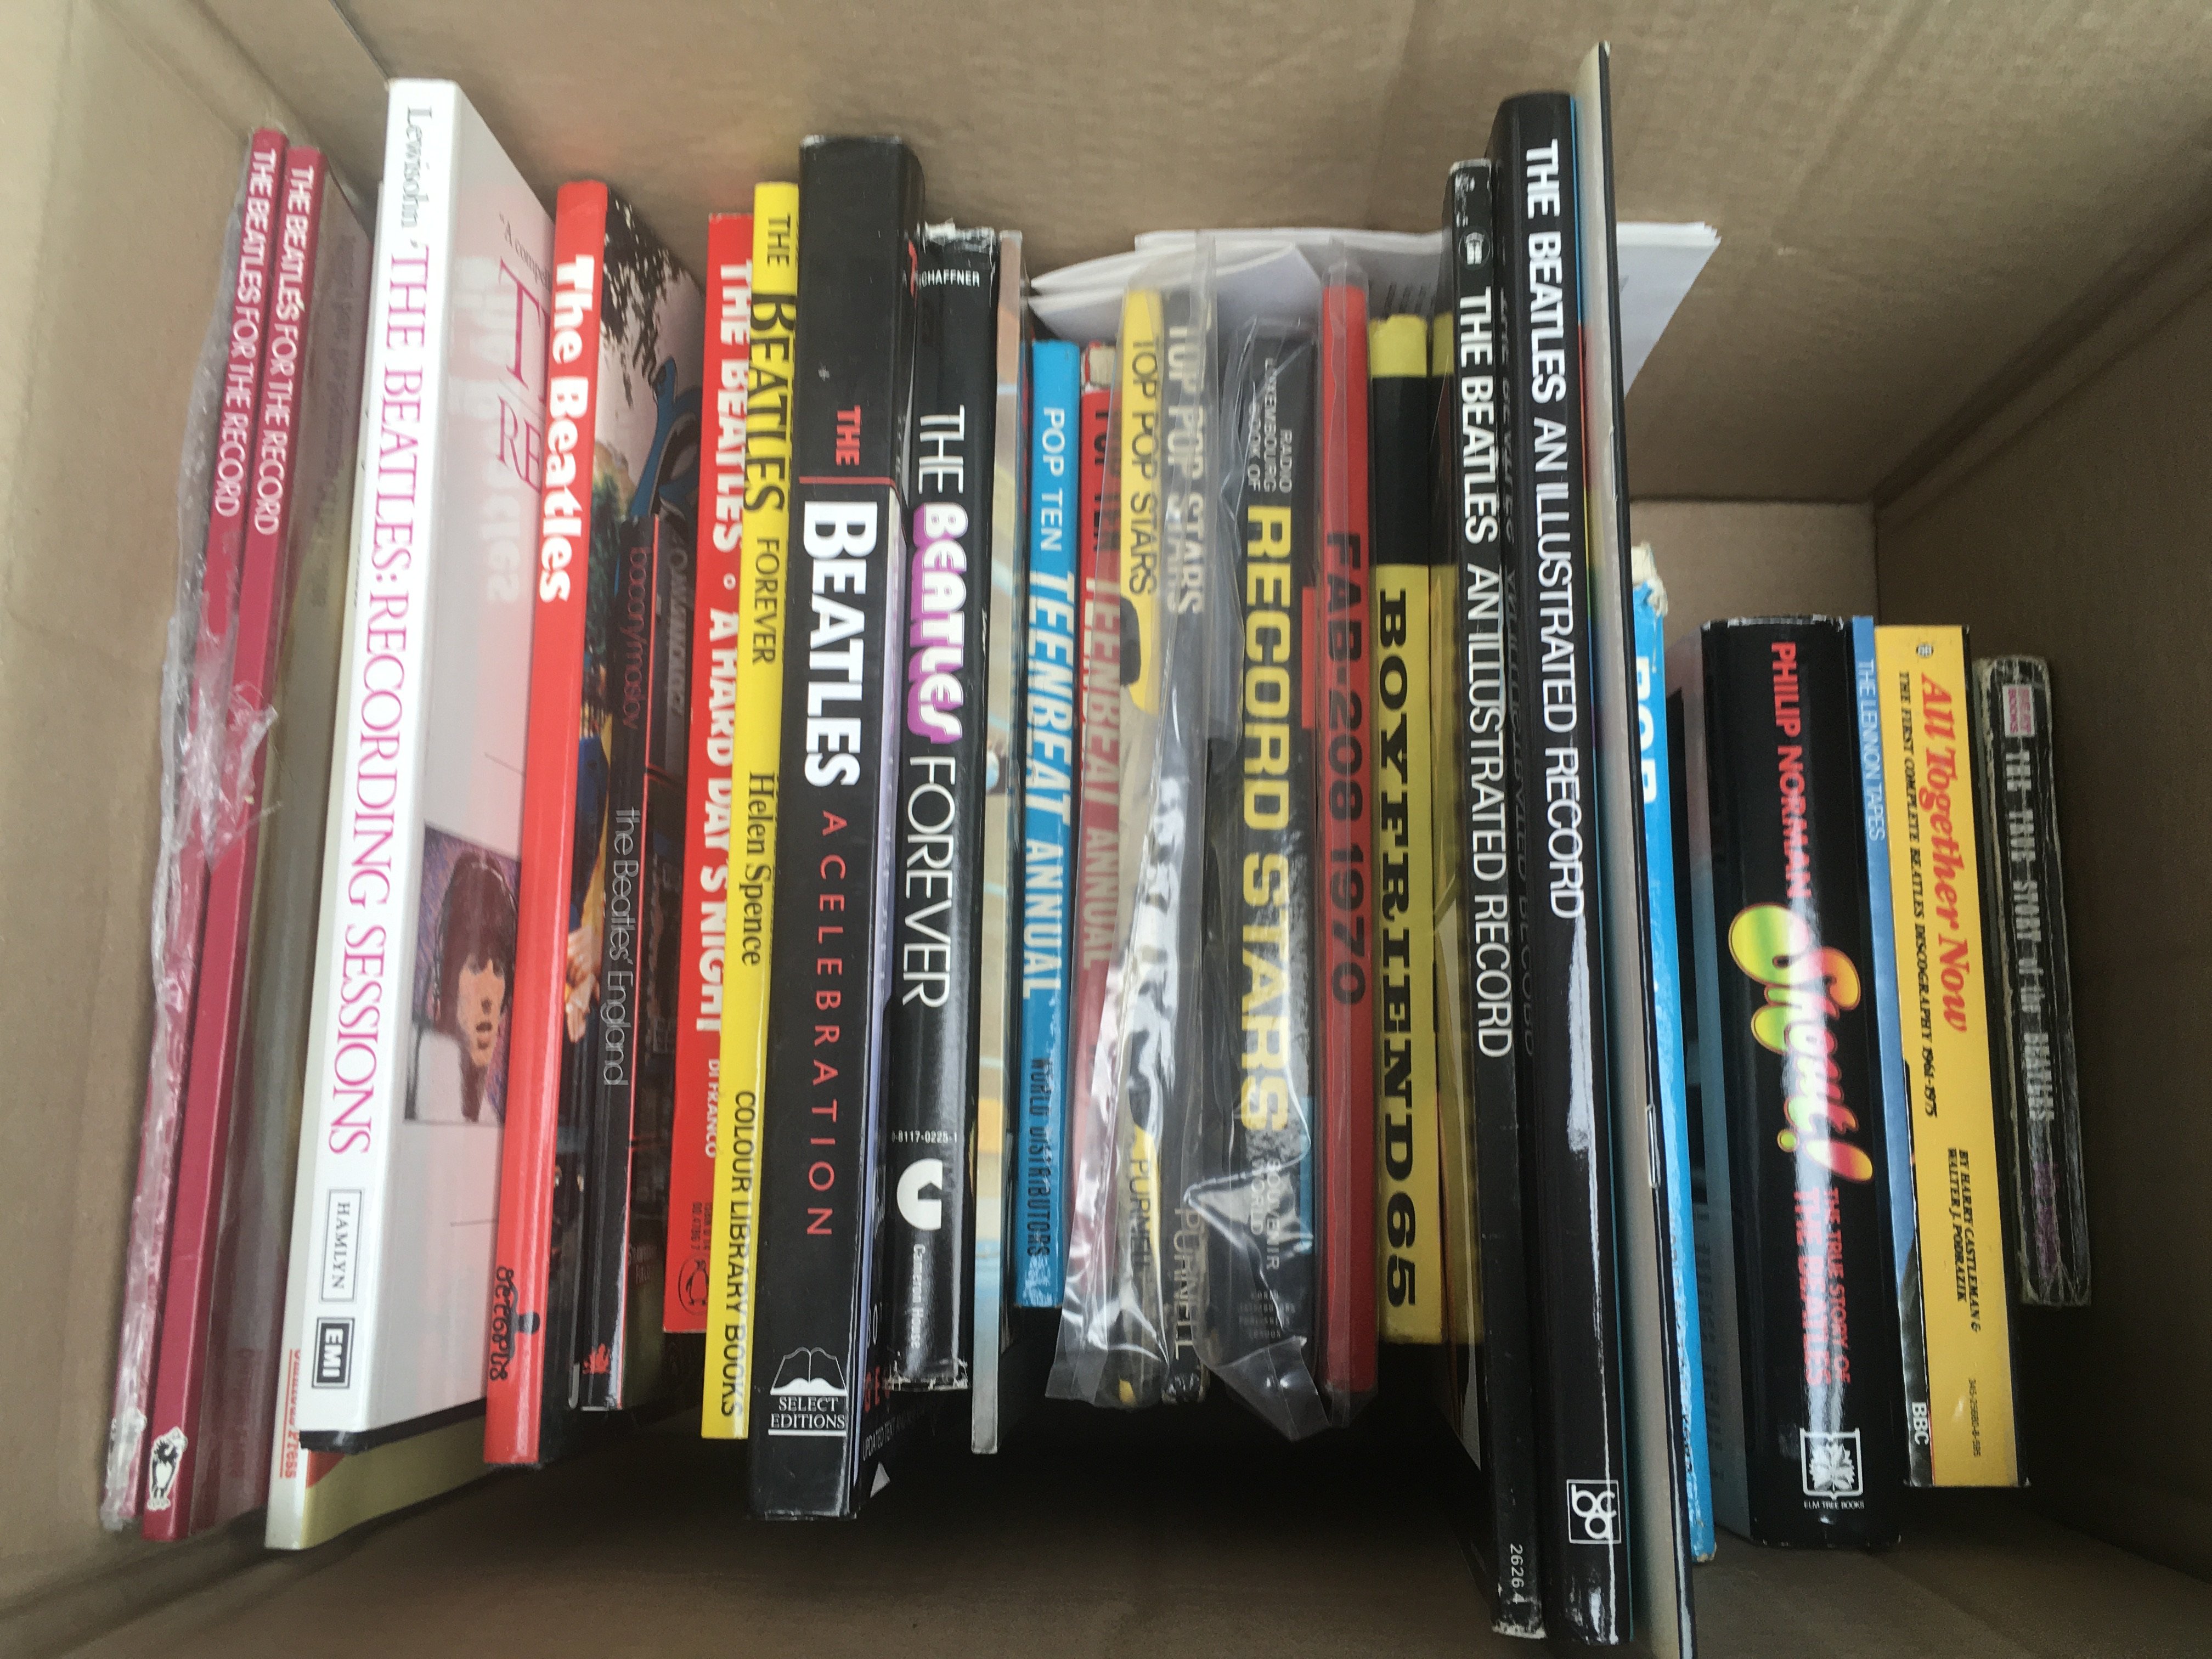 A box of Beatles and 60s pop music books.